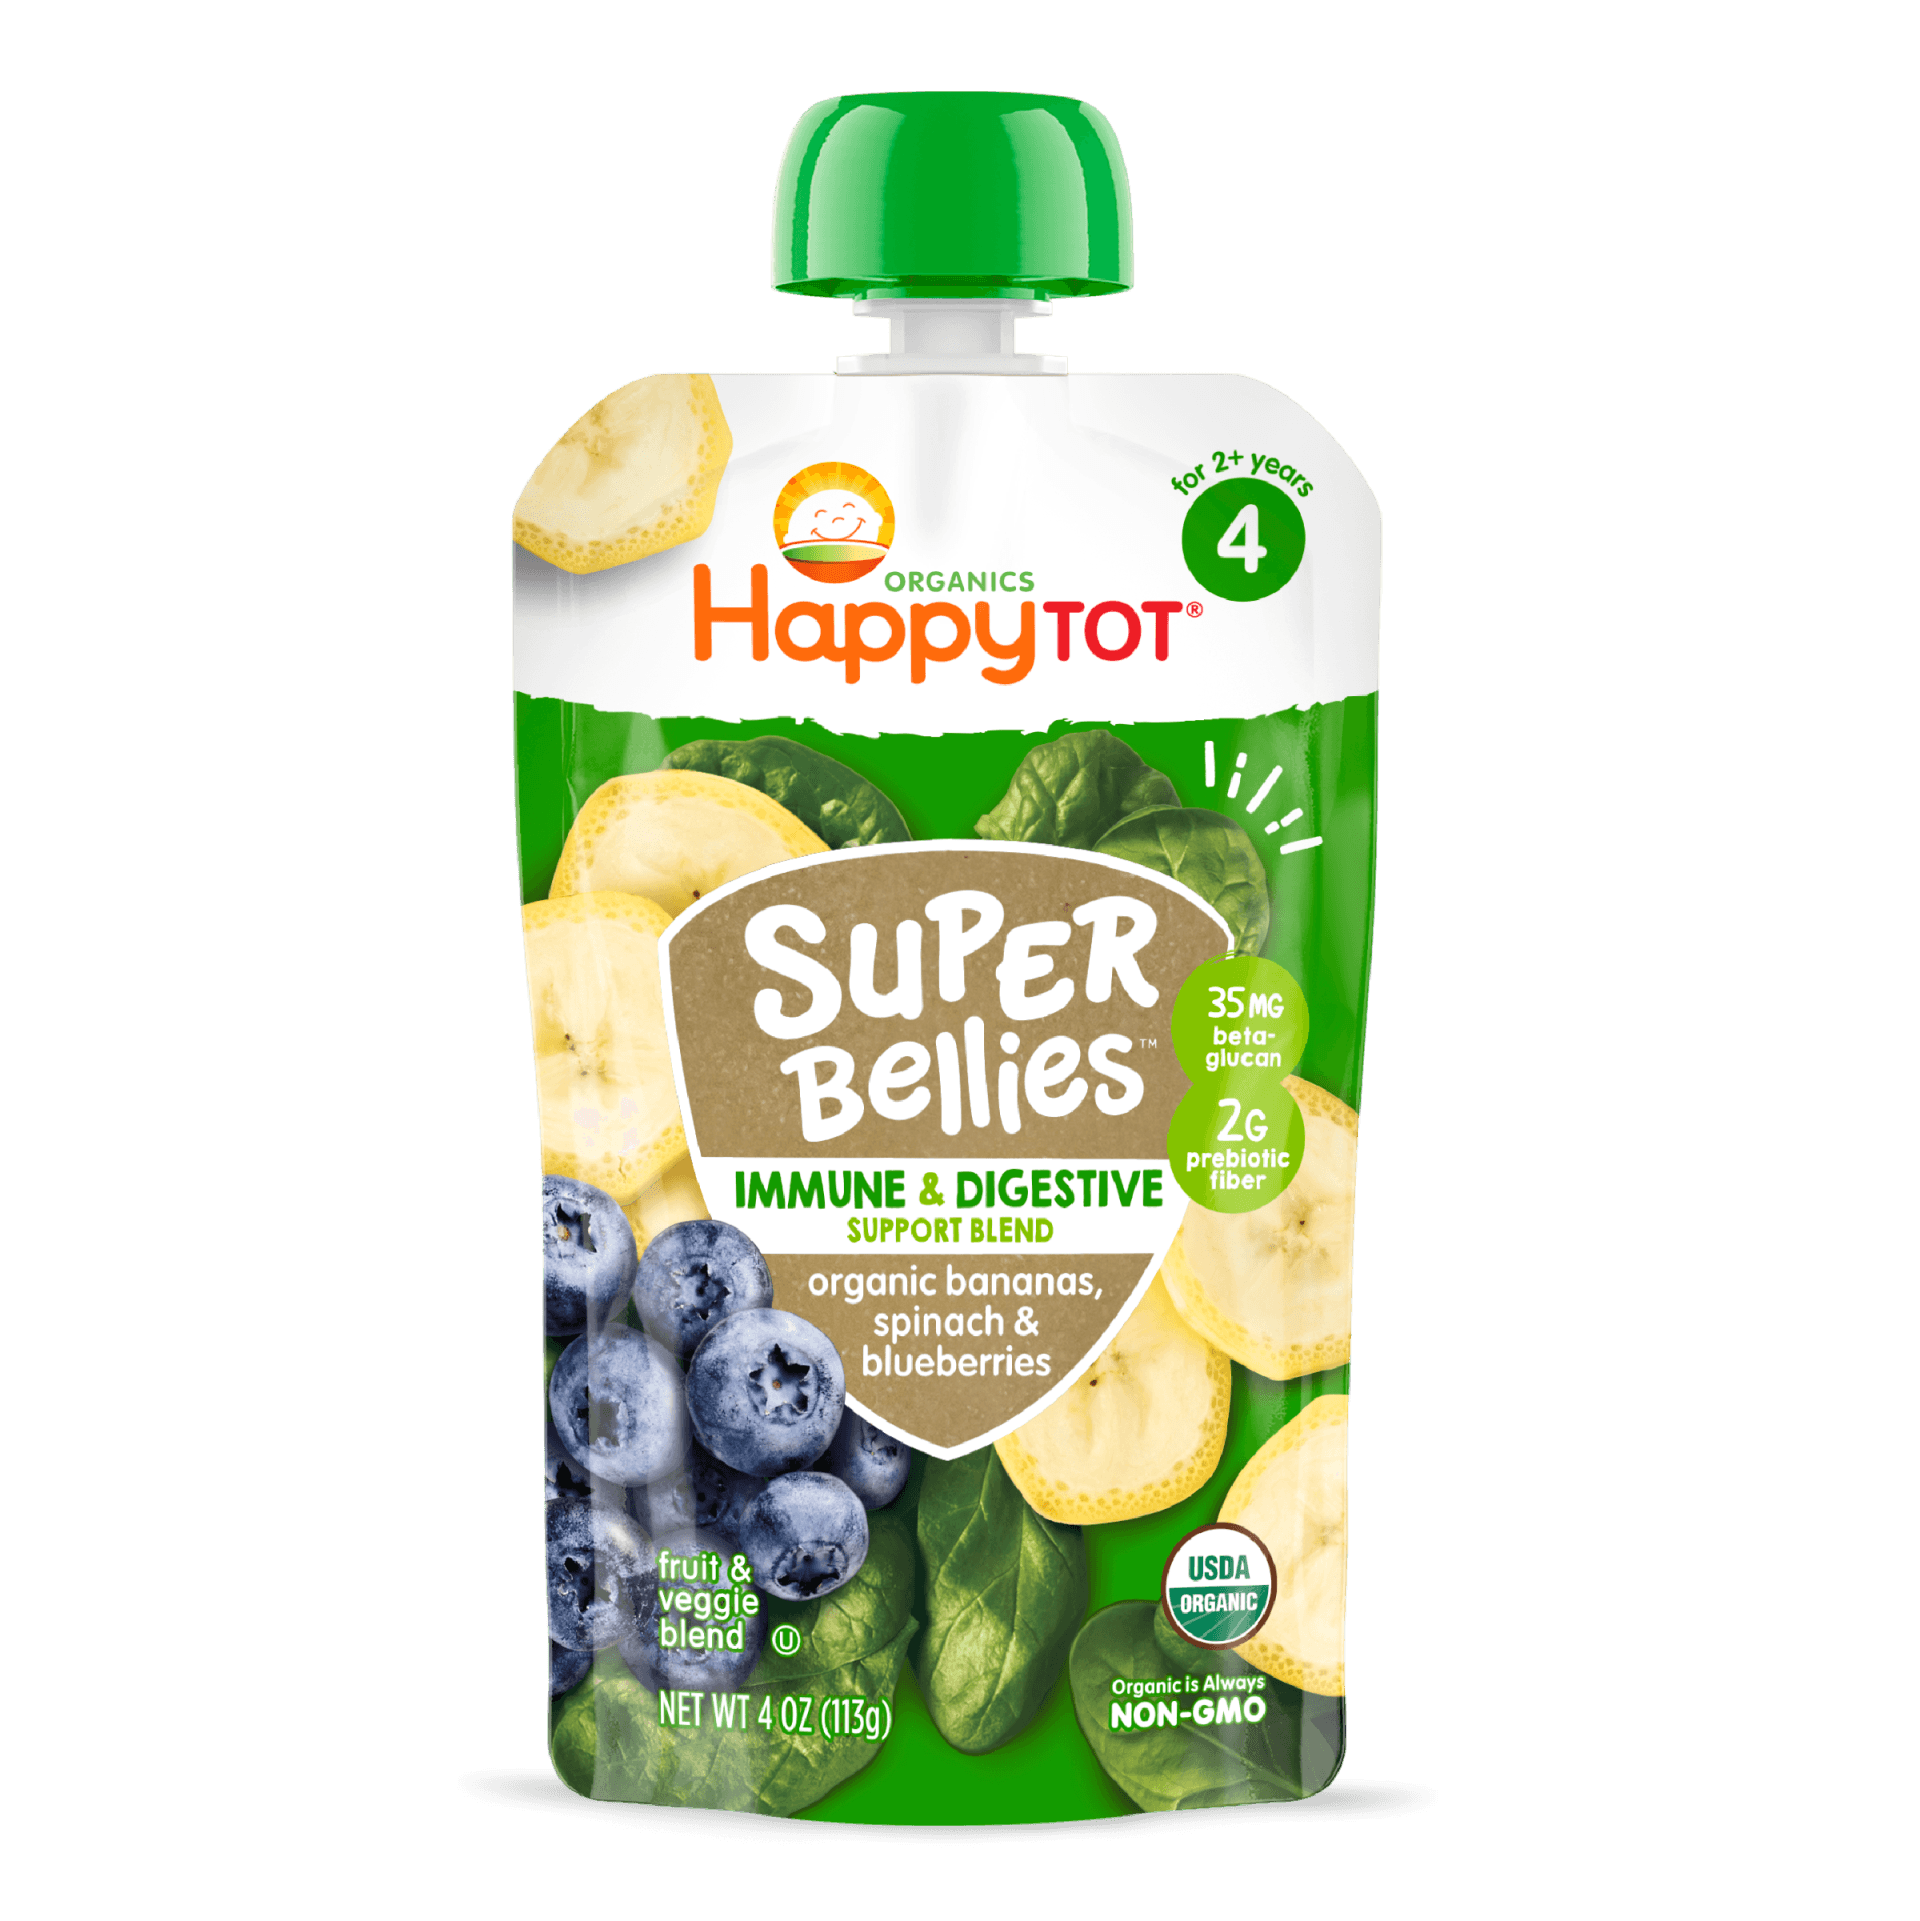 Happy Tot S4 - Super Bellies Organic Bananas Spinach & Blueberries 4Oz pouch 16 units per case 4.0 oz